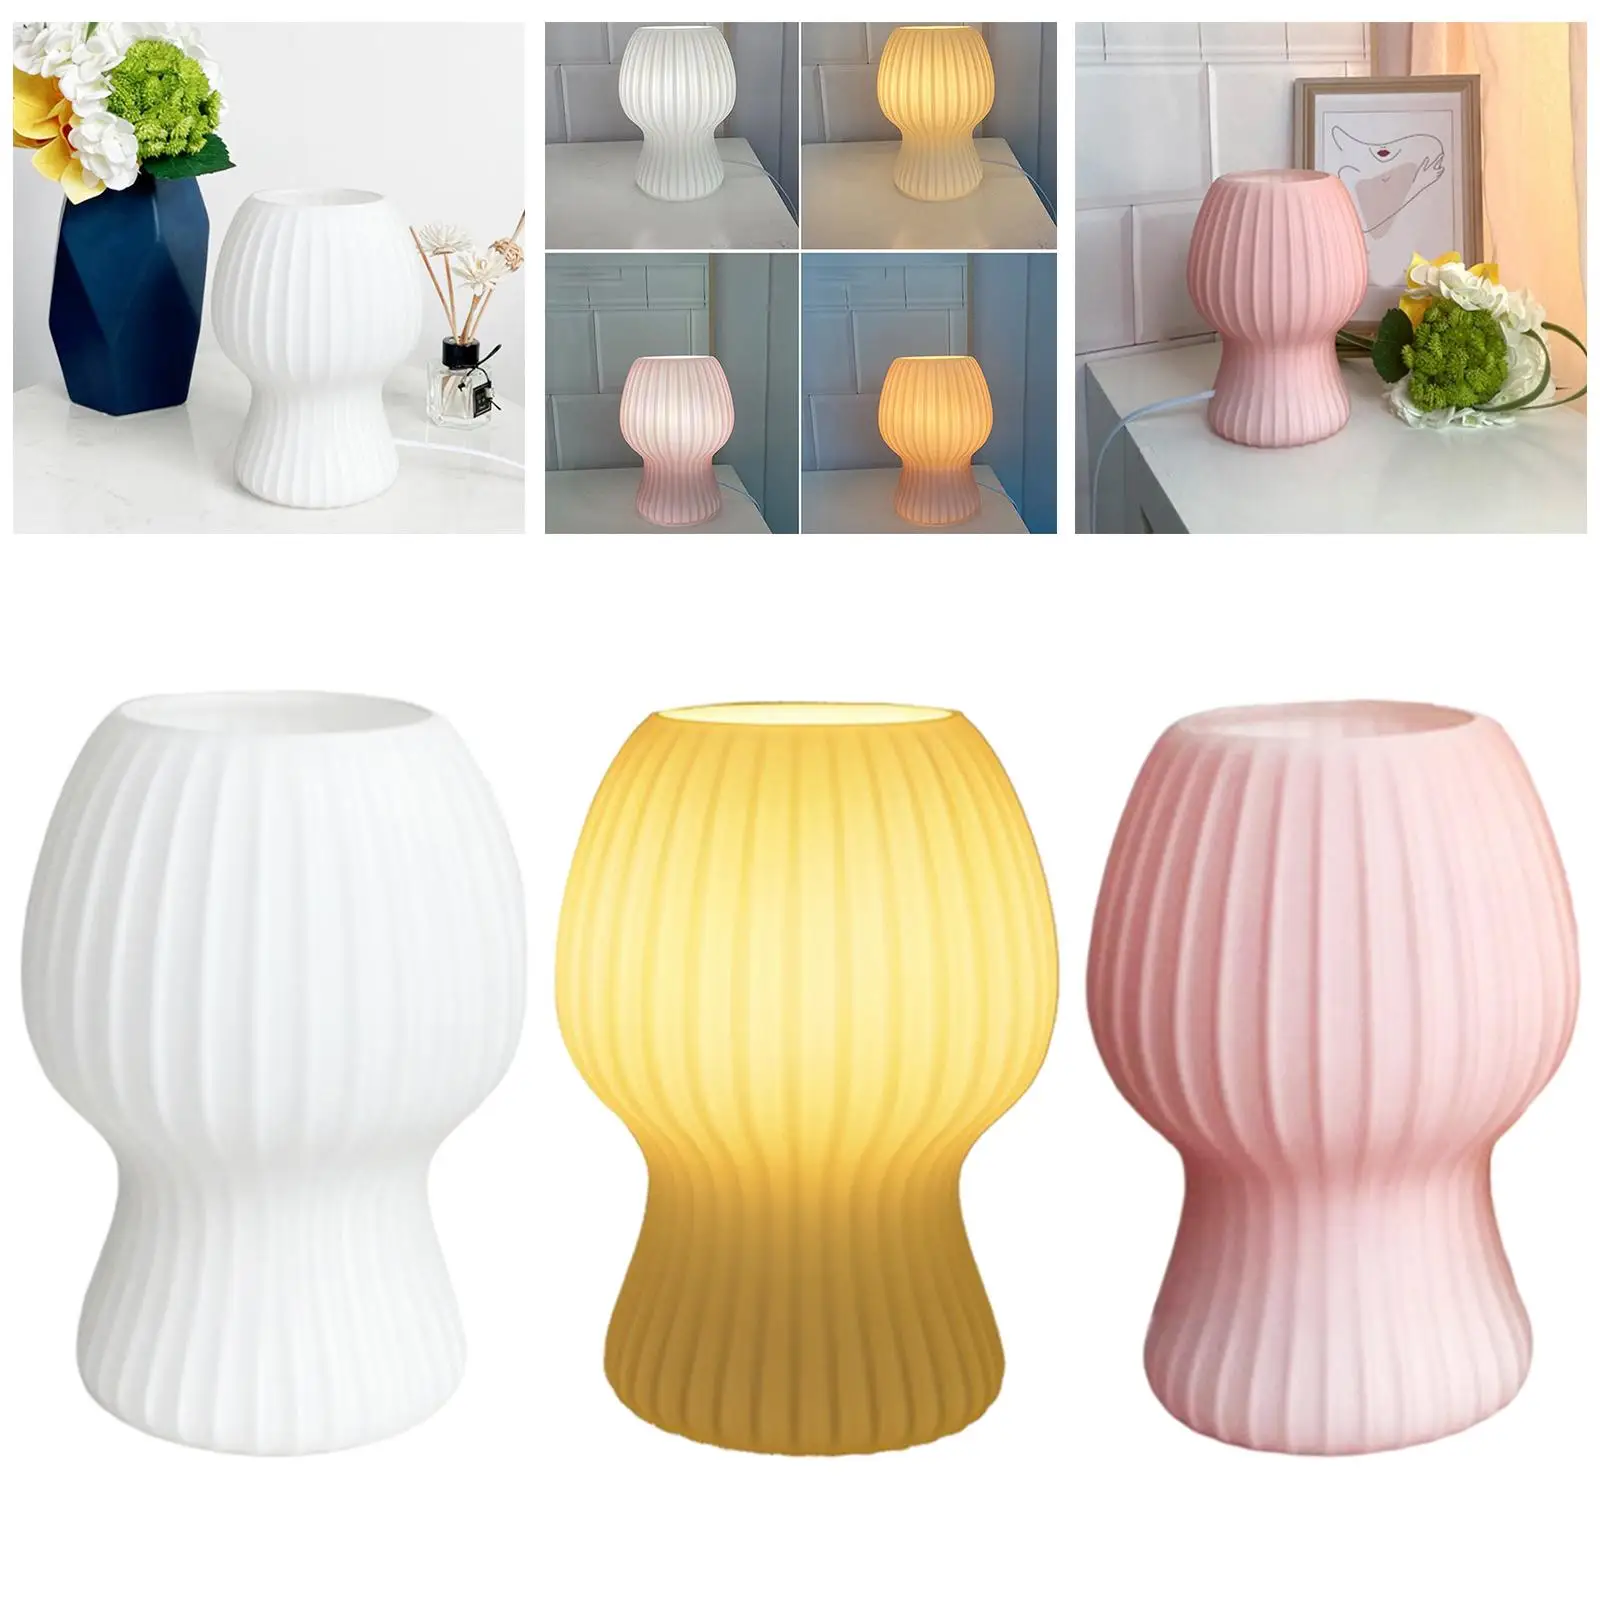 Striped Glass  Lamp Bedside Lamps Modern Night Light for NightStand Office Bedroom Household Decorative